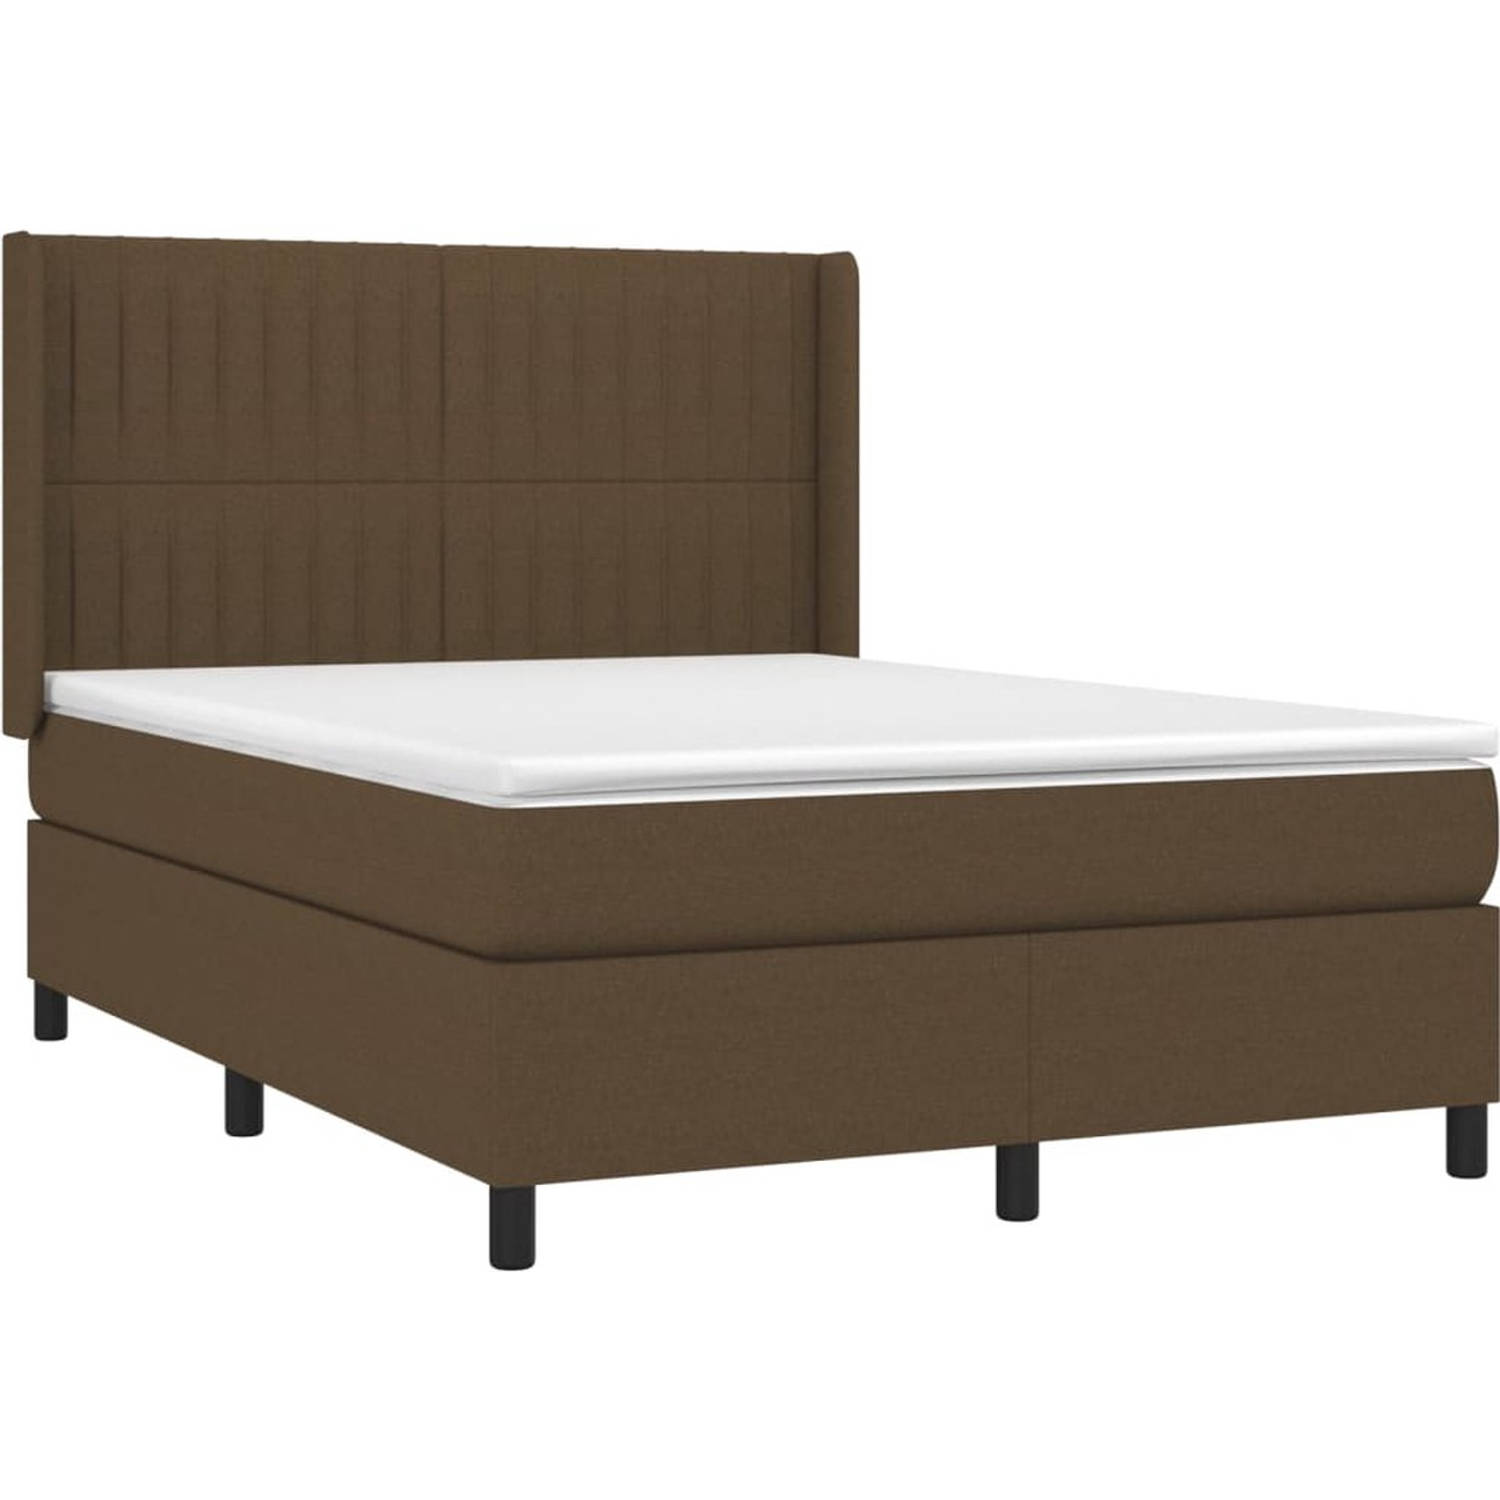 The Living Store Boxspringbed - Donkerbruin - 203 x 147 x 118/128 cm - Pocketvering